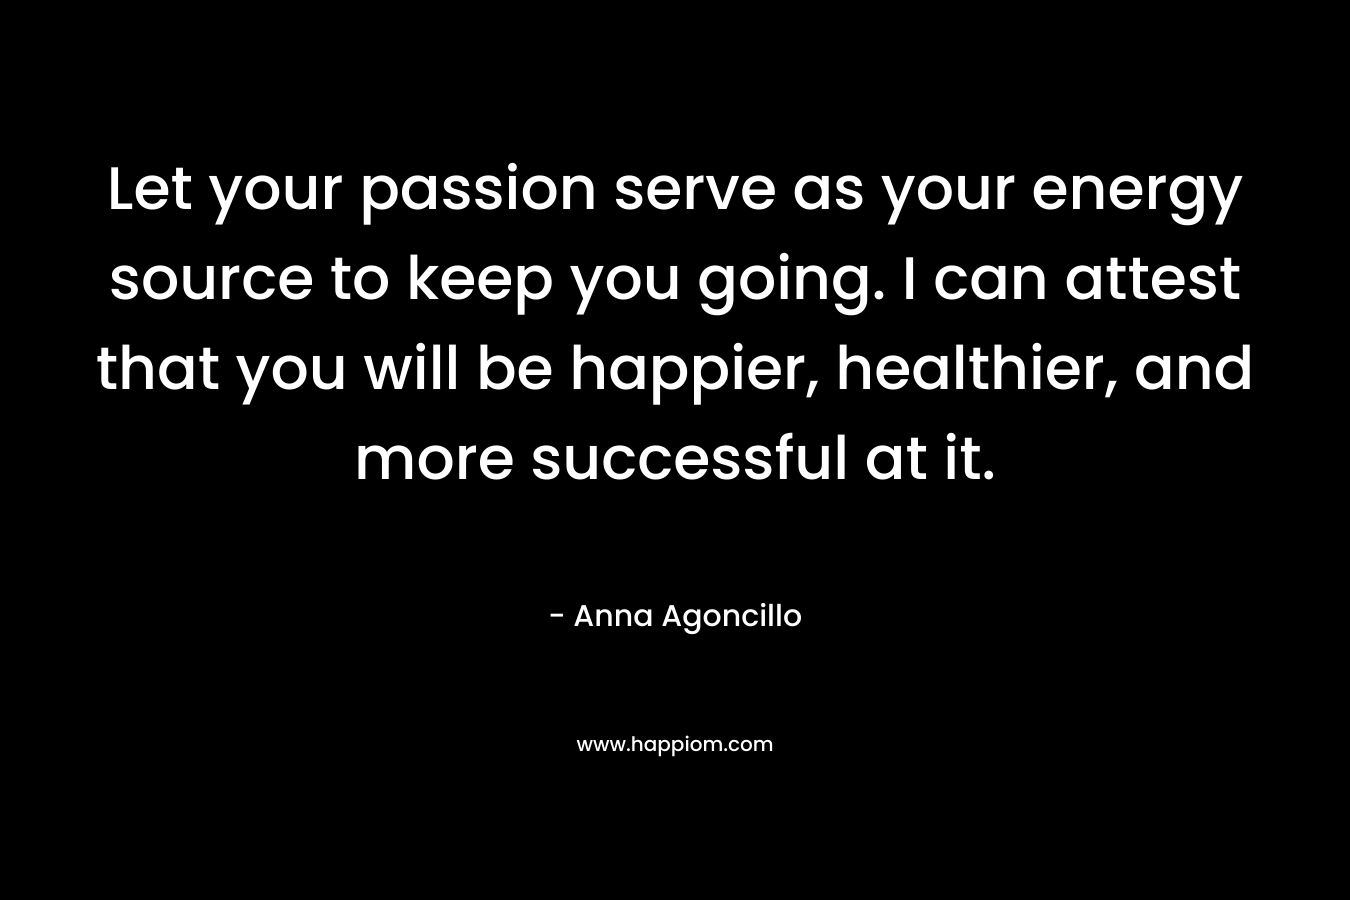 Let your passion serve as your energy source to keep you going. I can attest that you will be happier, healthier, and more successful at it. – Anna Agoncillo